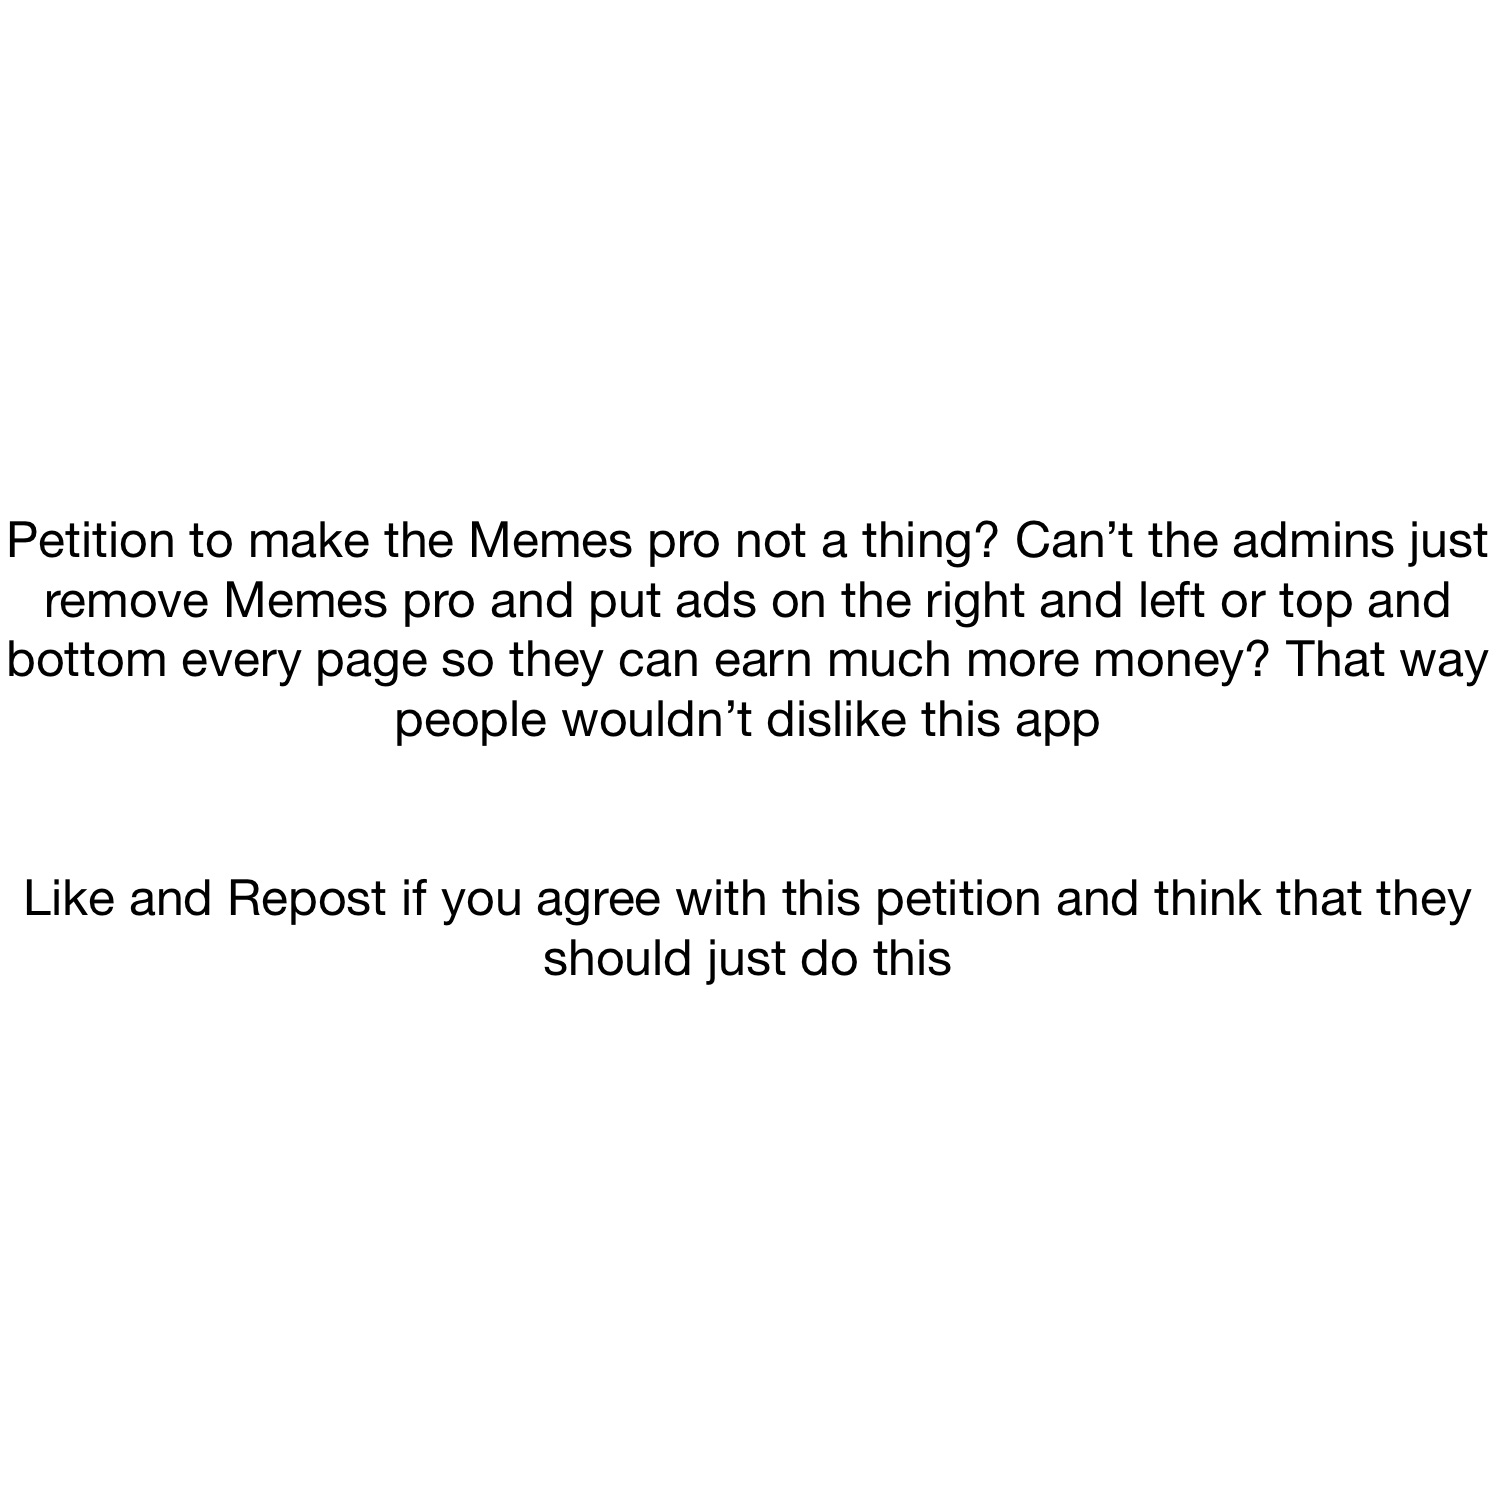 Petition to make the Memes pro not a thing? Can’t the admins just remove Memes pro and put ads on the right and left or top and bottom every page so they can earn much more money? That way people wouldn’t dislike this app


Like and Repost if you agree with this petition and think that they should just do this